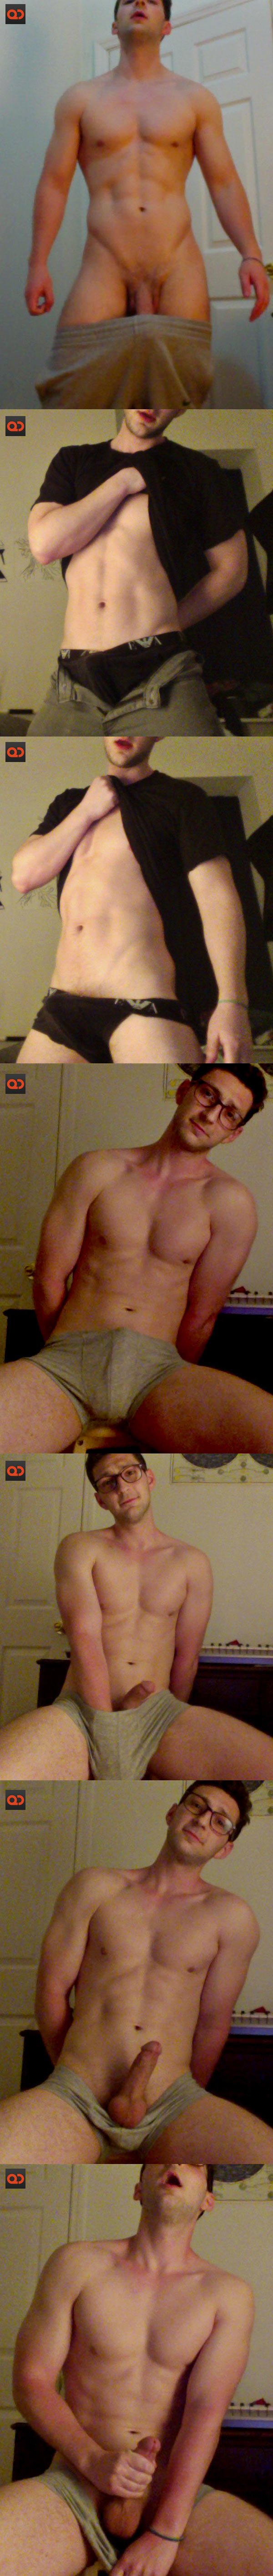 nude_bf_of_the_week-glasses_and_sweatpants-collage02